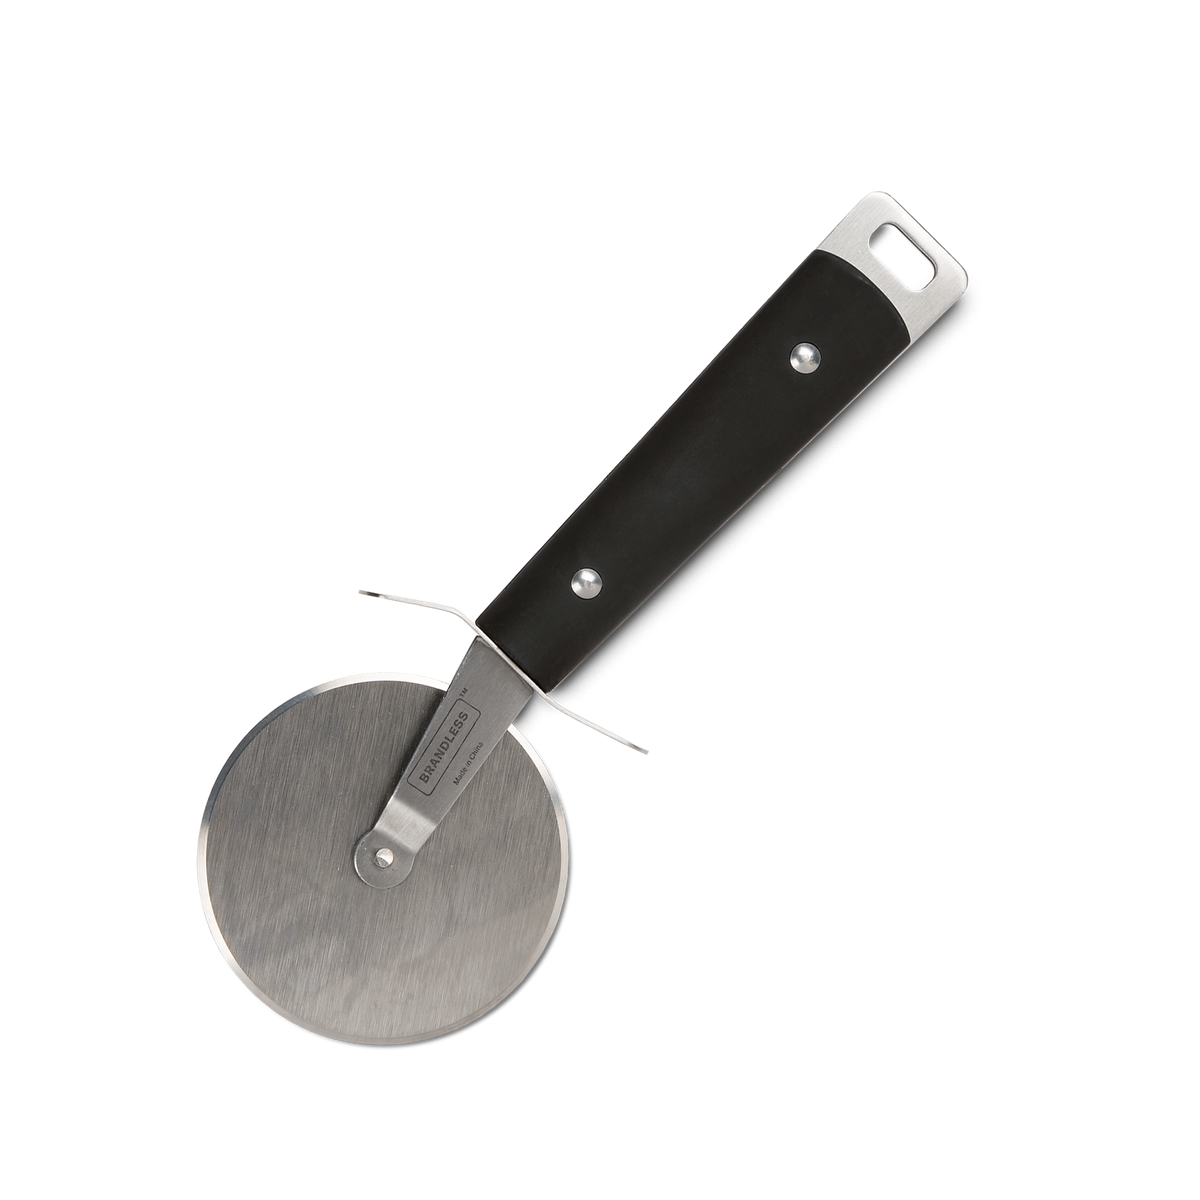 Side view, brandless branded pizza cutter, made in china.